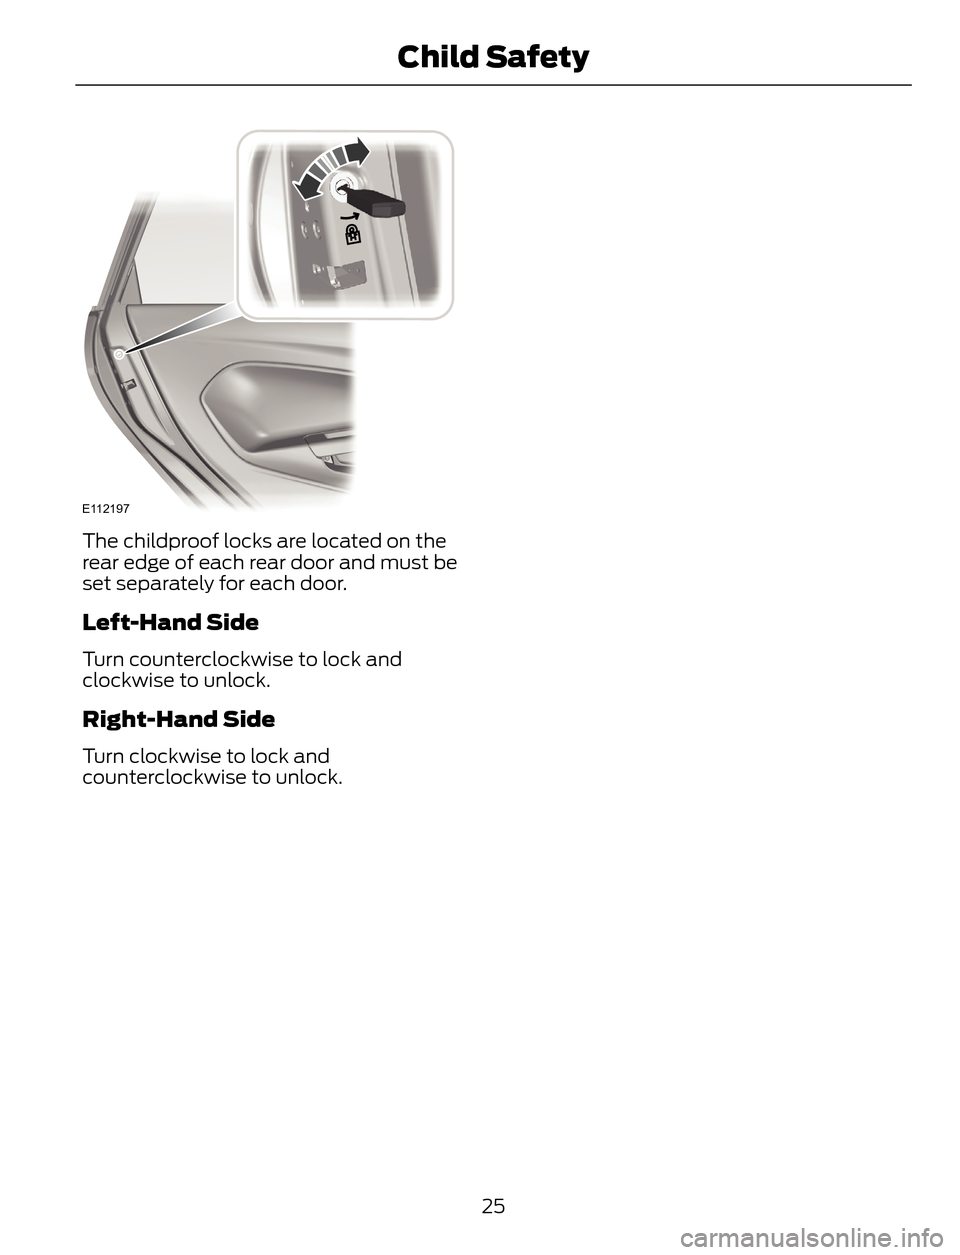 FORD ESCAPE 2014 3.G Owners Manual E112197
The childproof locks are located on the
rear edge of each rear door and must be
set separately for each door.
Left-Hand Side
Turn counterclockwise to lock and
clockwise to unlock.
Right-Hand S